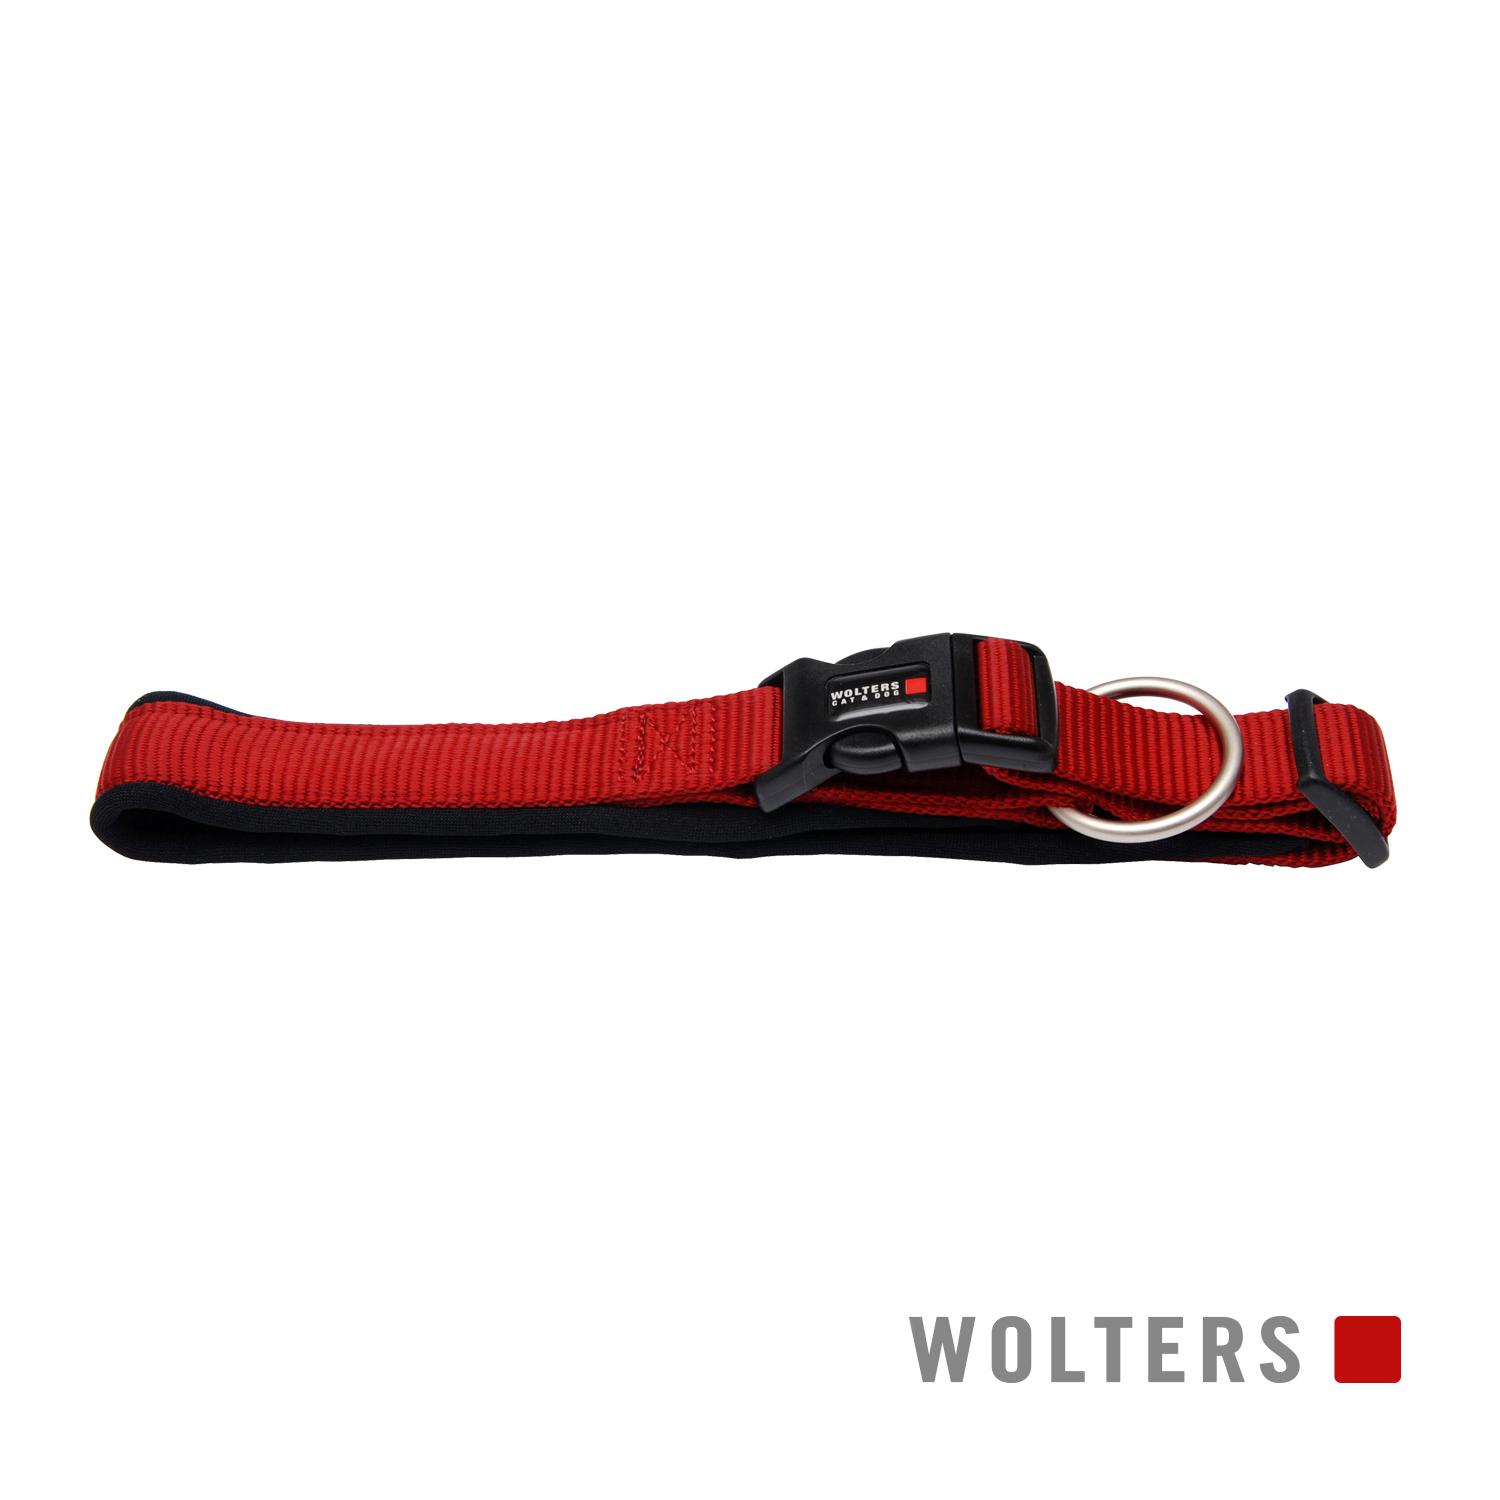 Wolters Halsband Professional Comfort Rot/Schwarz 55-60cm x 35mm